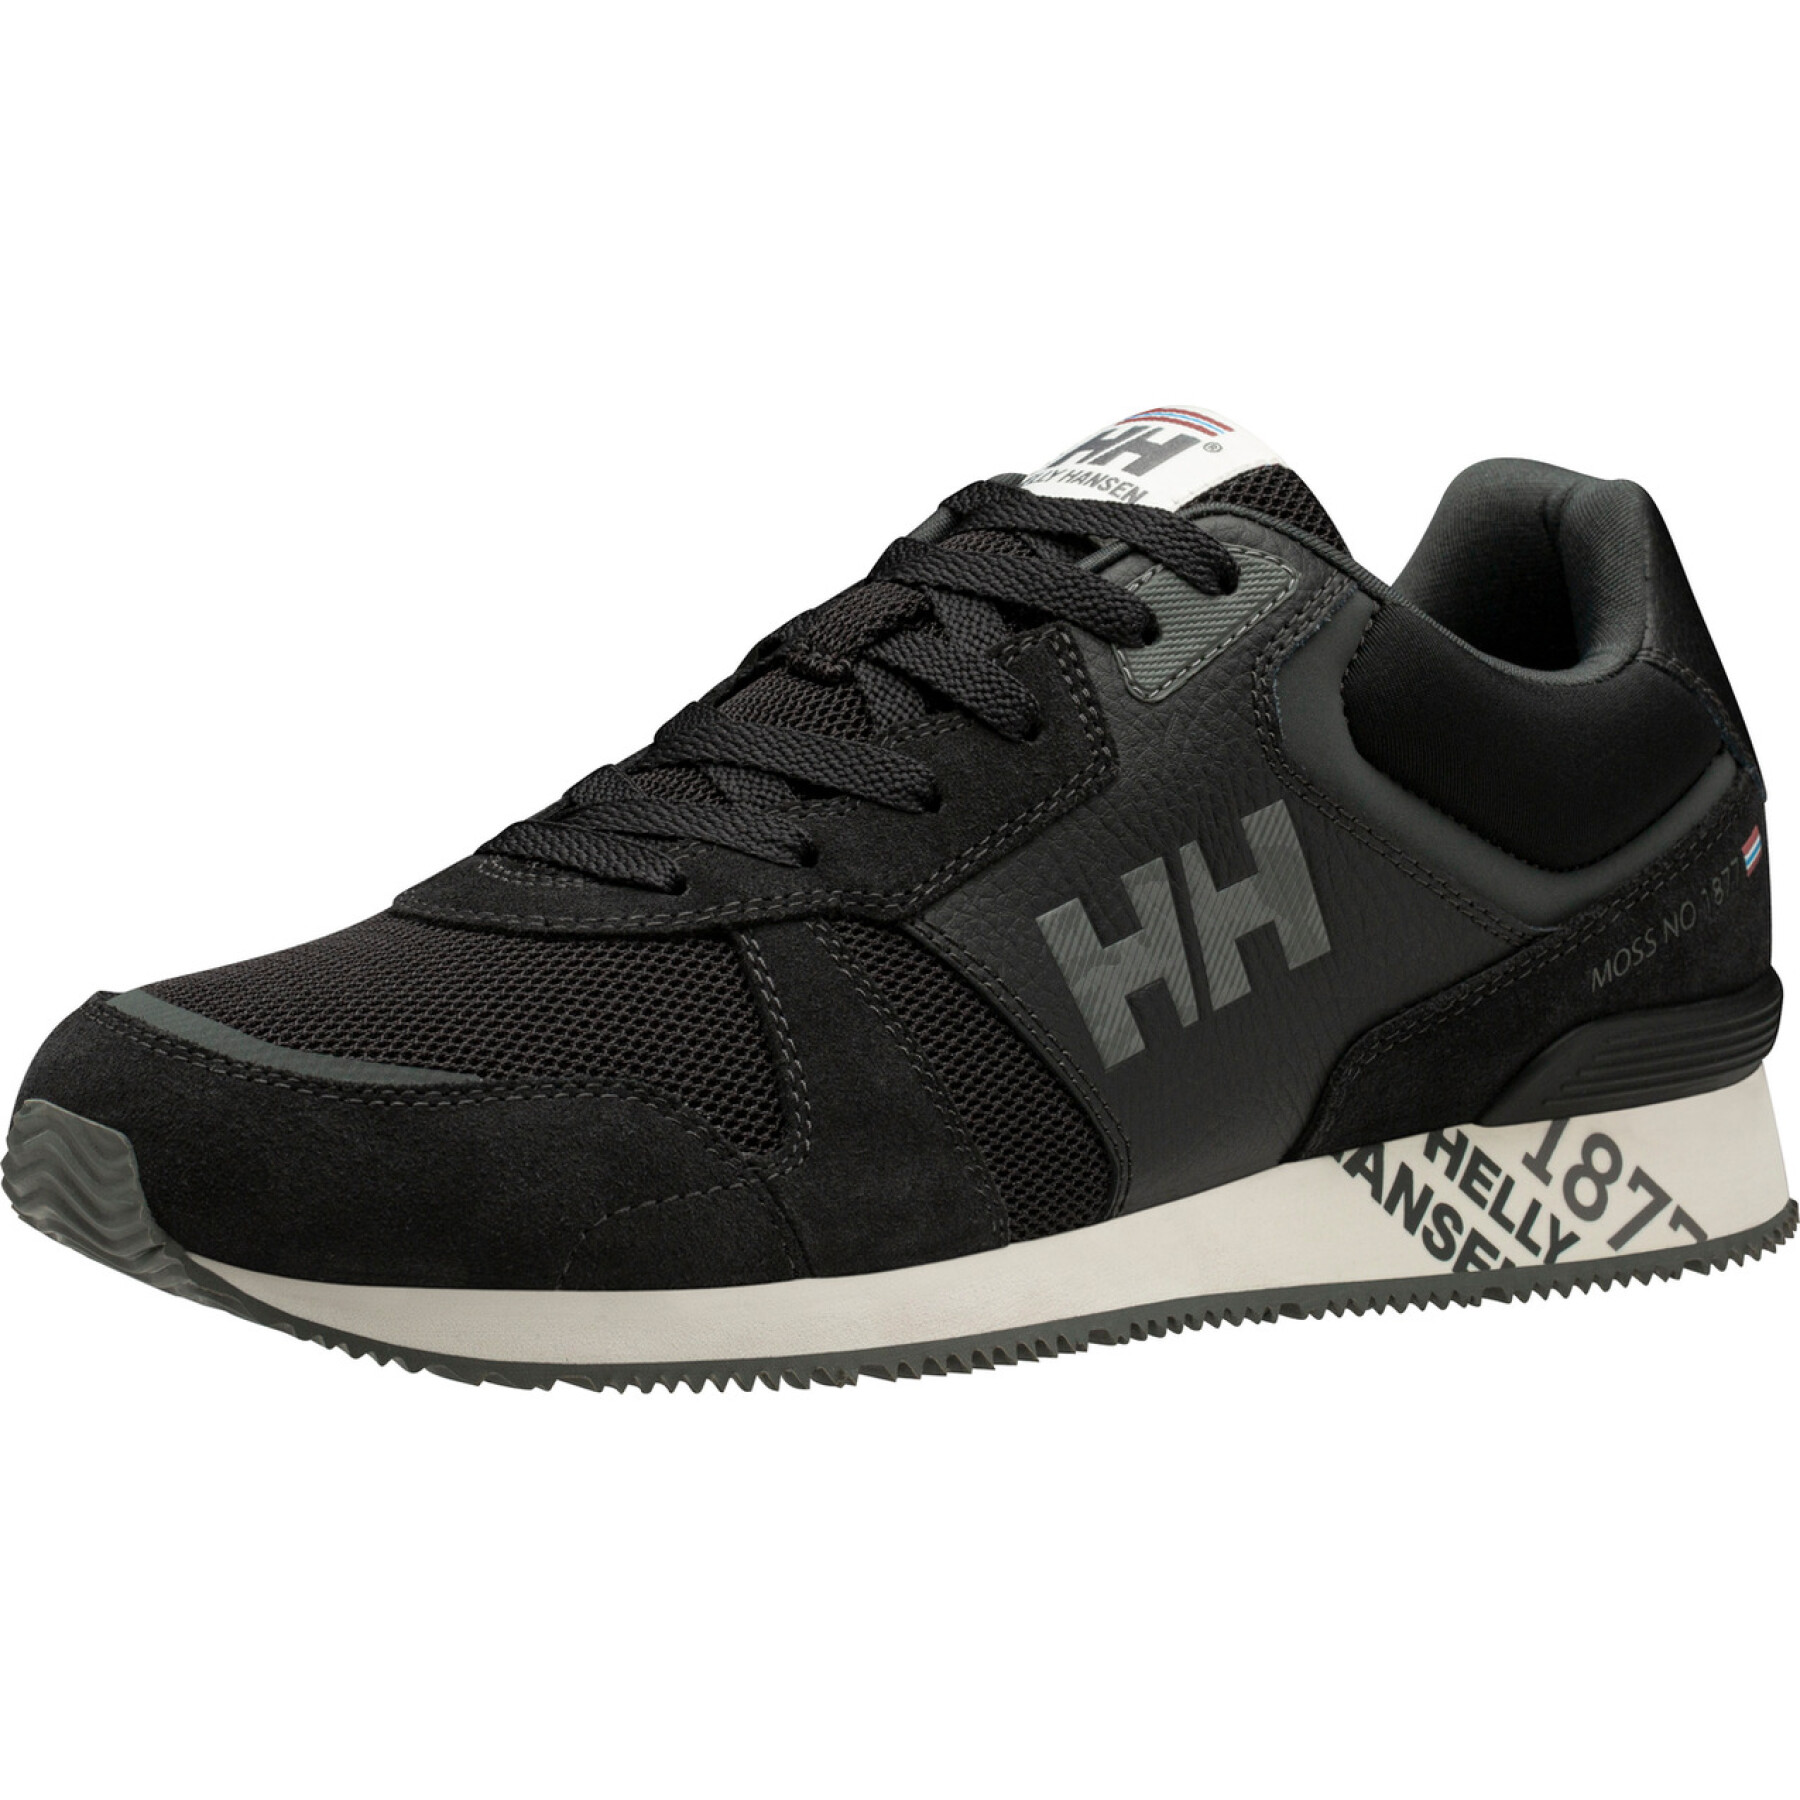 Walking shoes Helly Hansen anakin leather